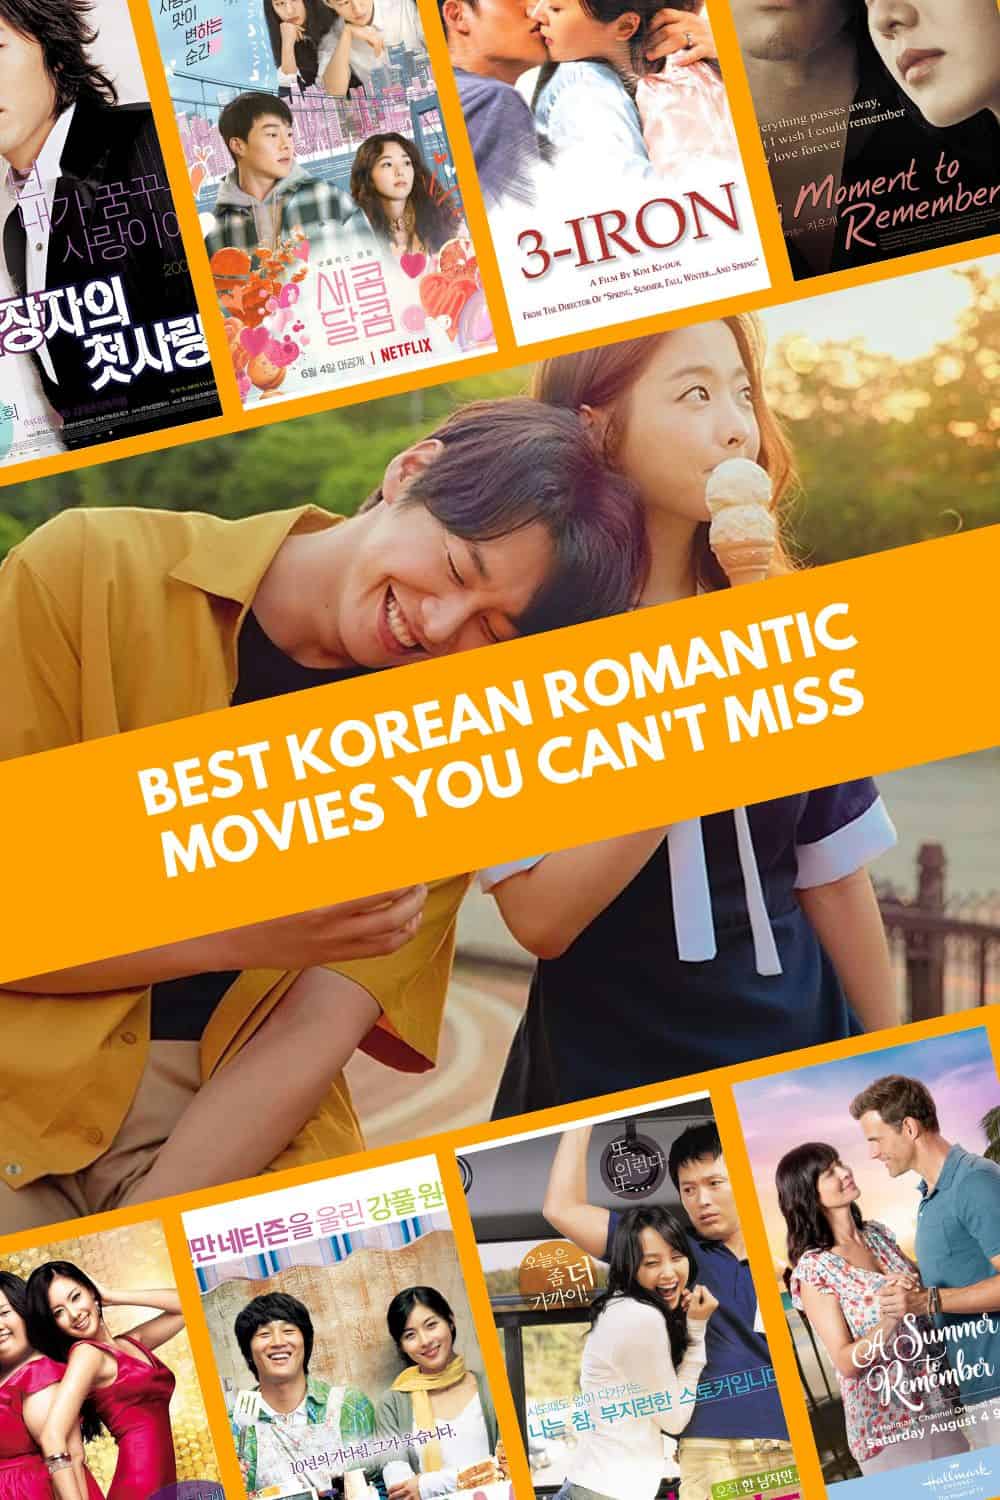 Korean Romantic Movies You Can't Miss